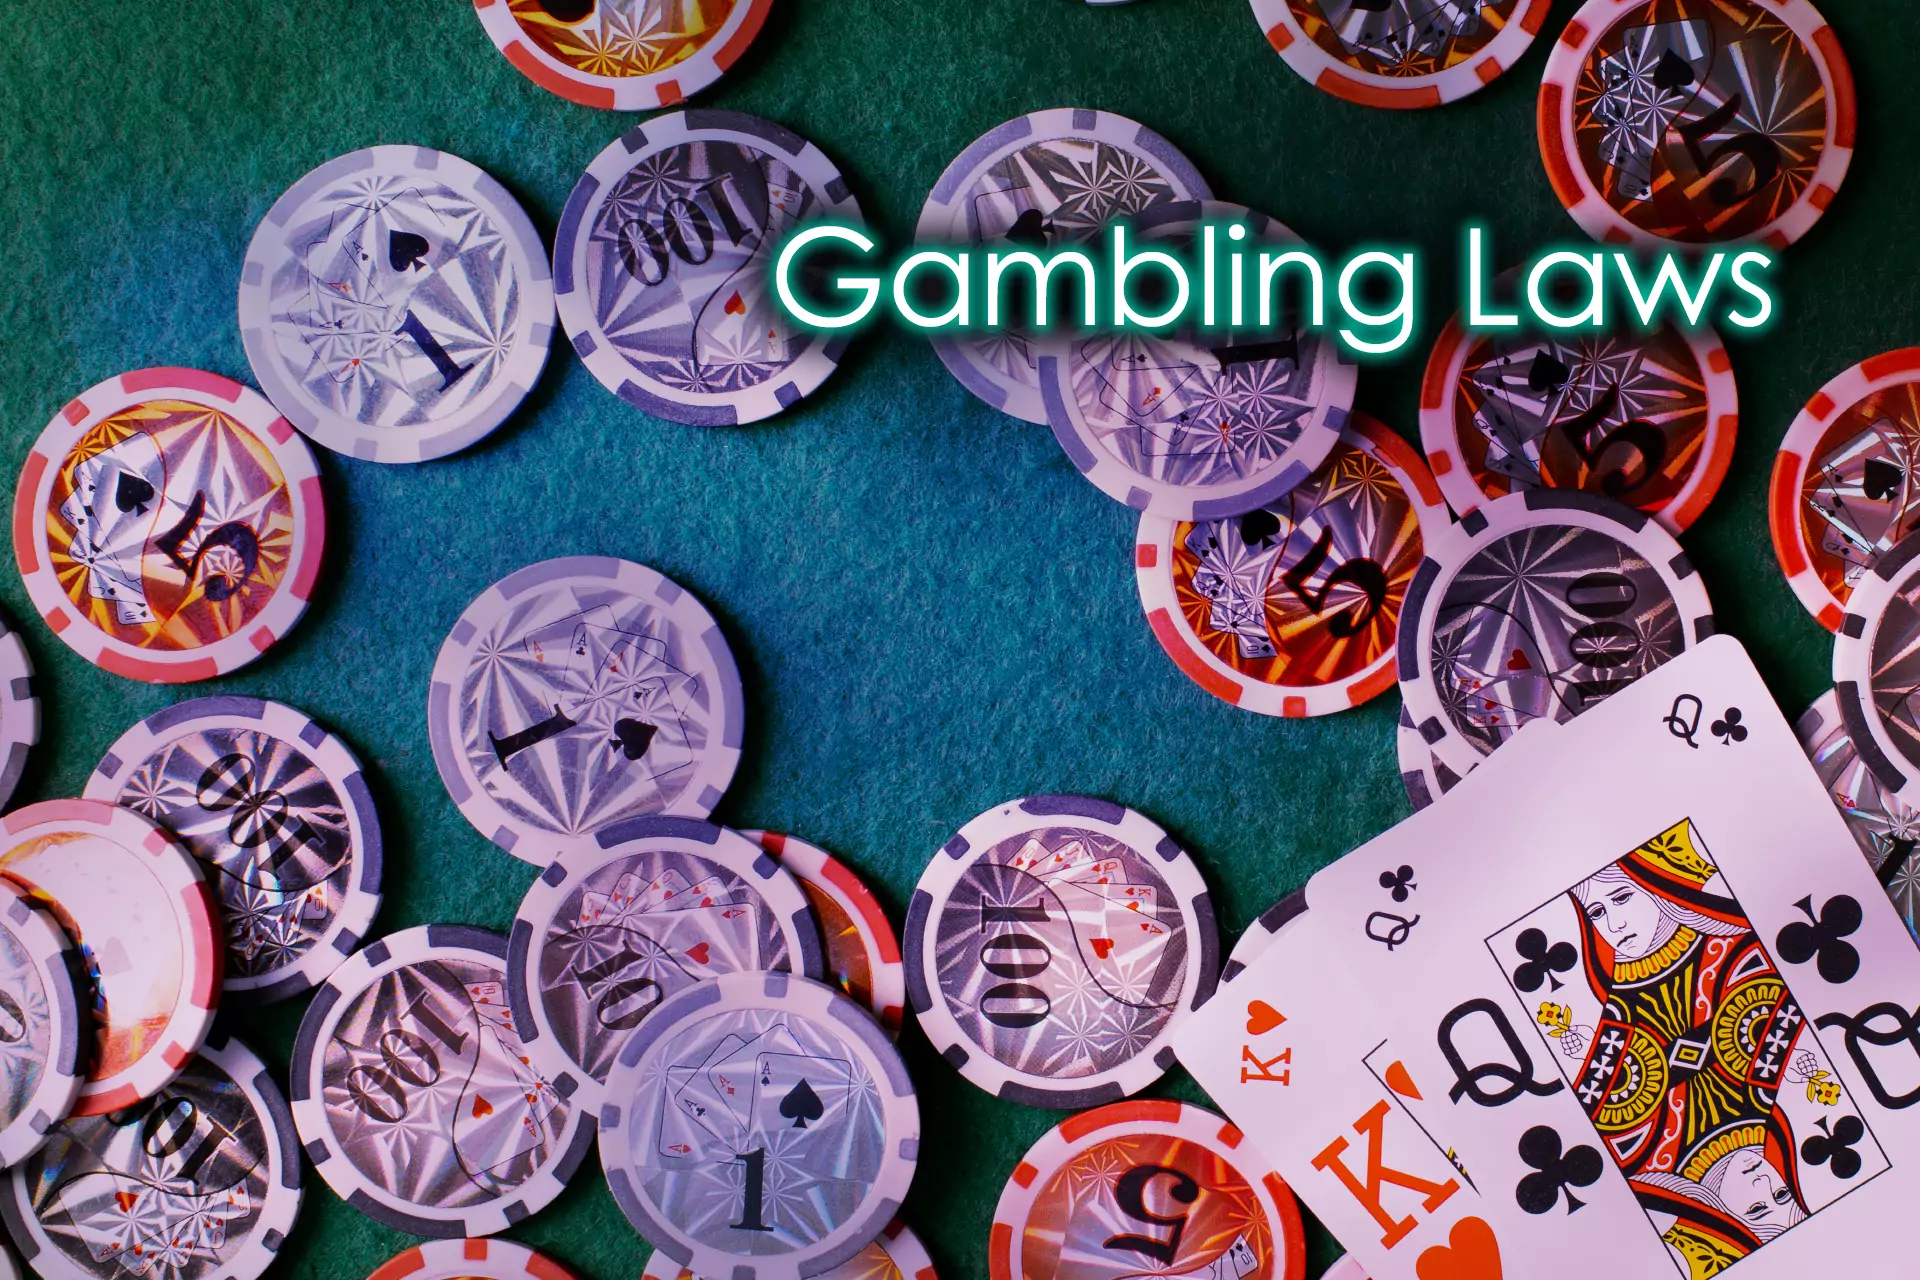 Online casinos are regulated by laws, so without a gambling license, they would not work in India.